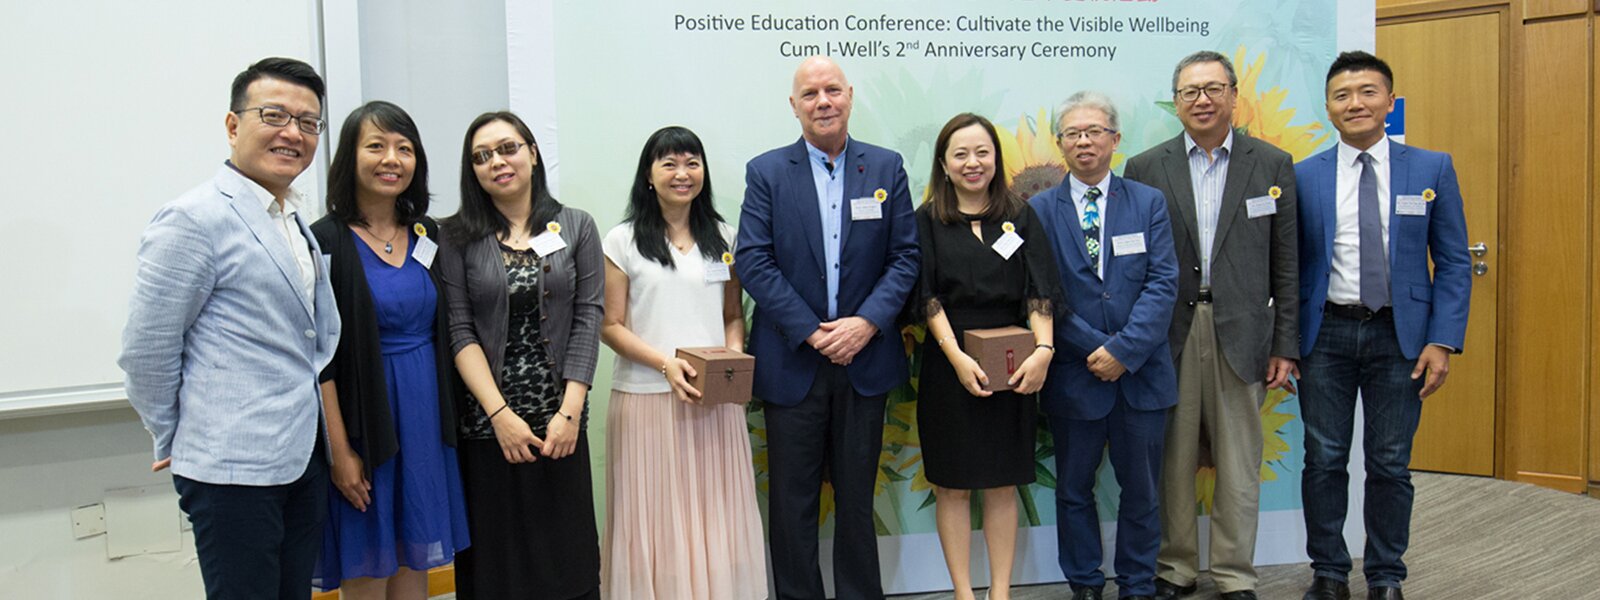 EdUHK’s Positive Education Conference: Cultivating Visible Wellbeing and I-WELL’s 2nd Anniversary Ceremony